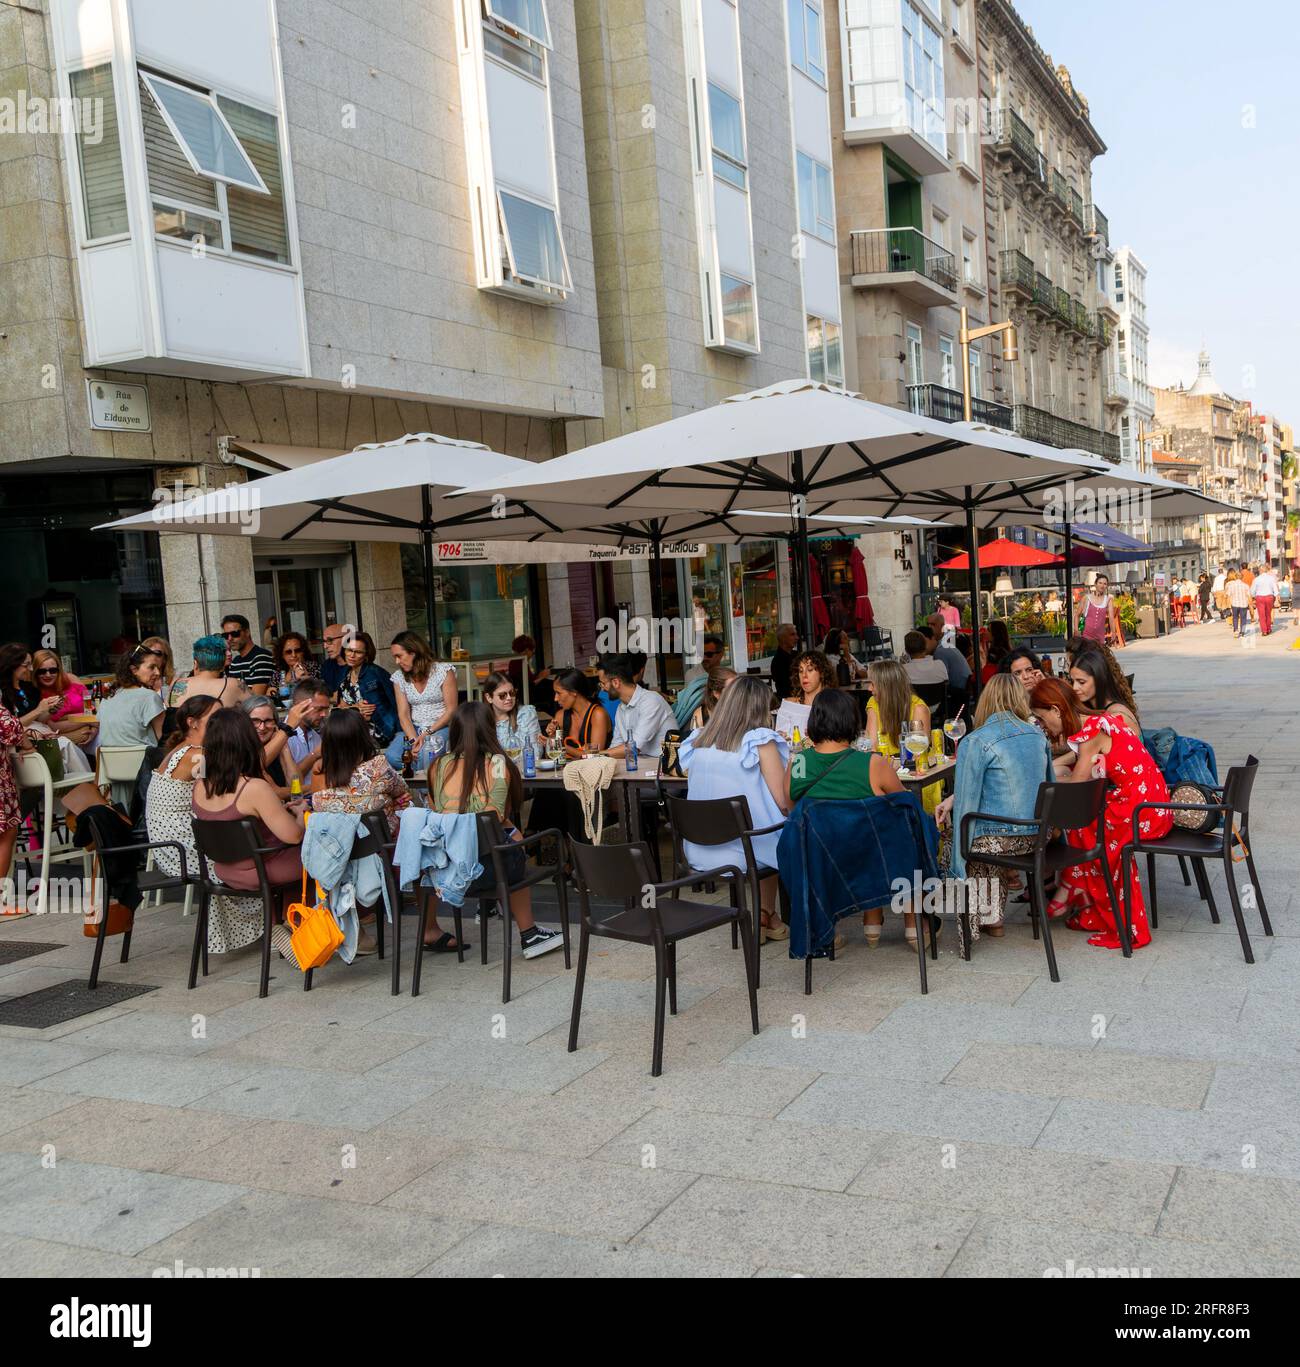 A large group of people sitting around  table at street cafe bar in the old town city centre Rua Elduayen, Vigo, Galicia, Spain Stock Photo